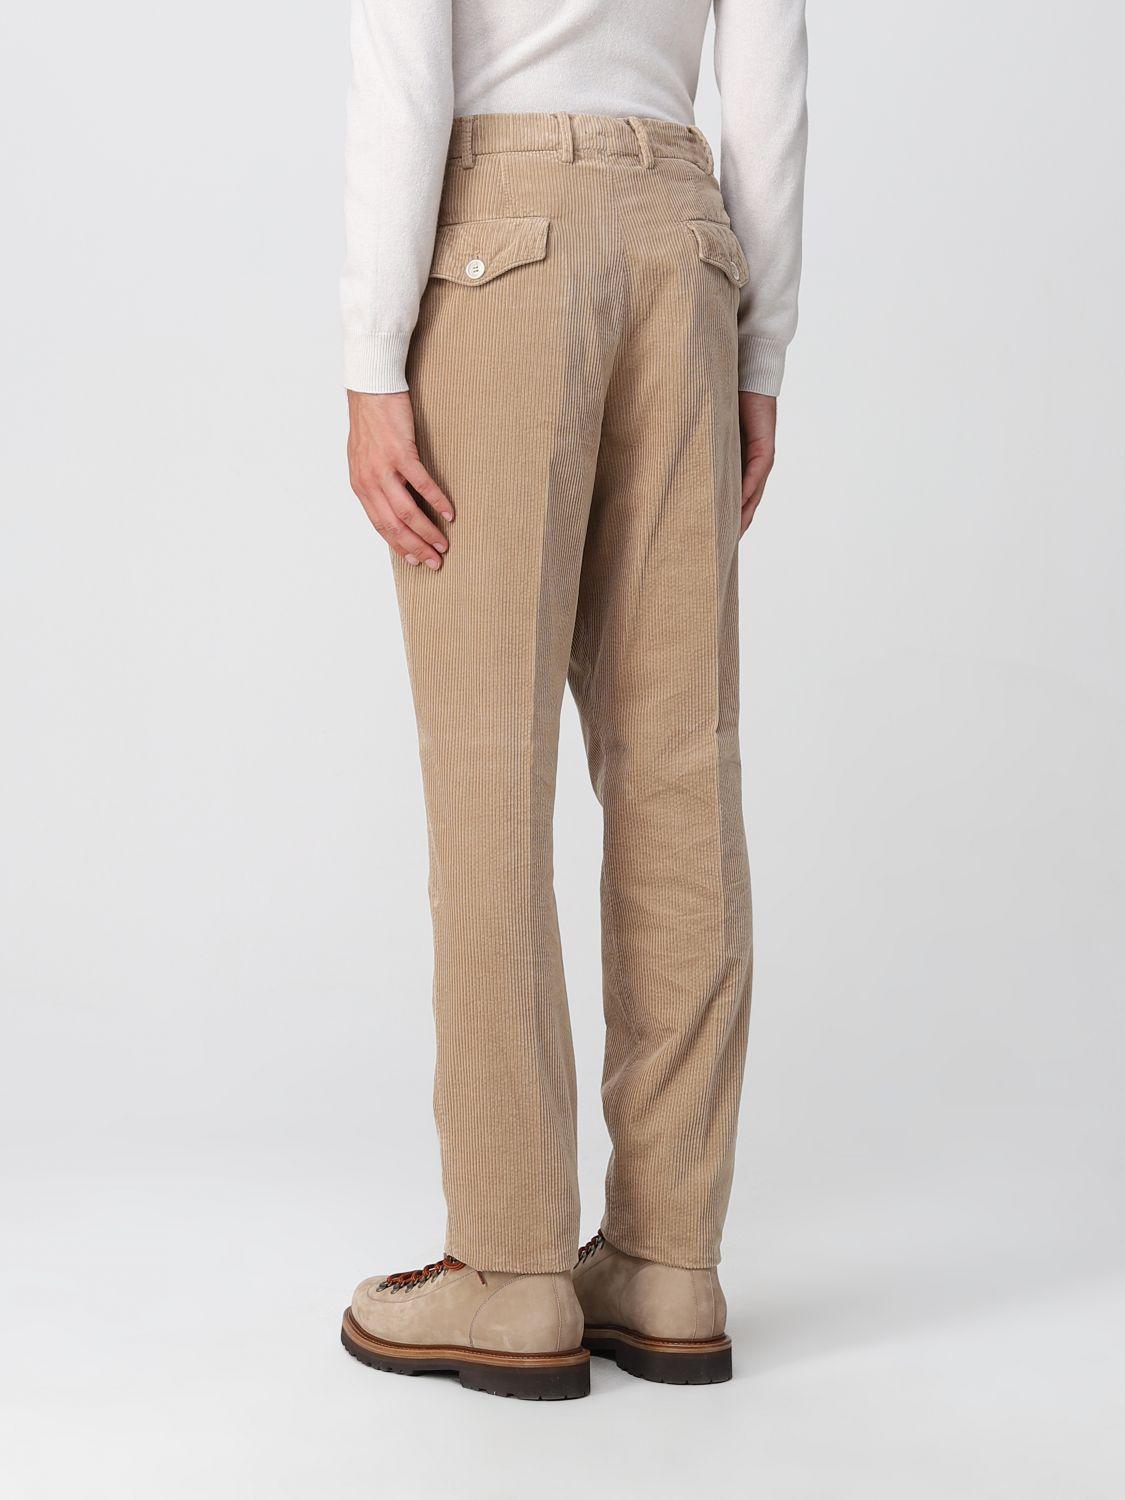 Slacks and Chinos Slacks and Chinos Brunello Cucinelli Trousers Brunello Cucinelli Velvet Pants in Camel Mens Trousers for Men Natural Save 10% 